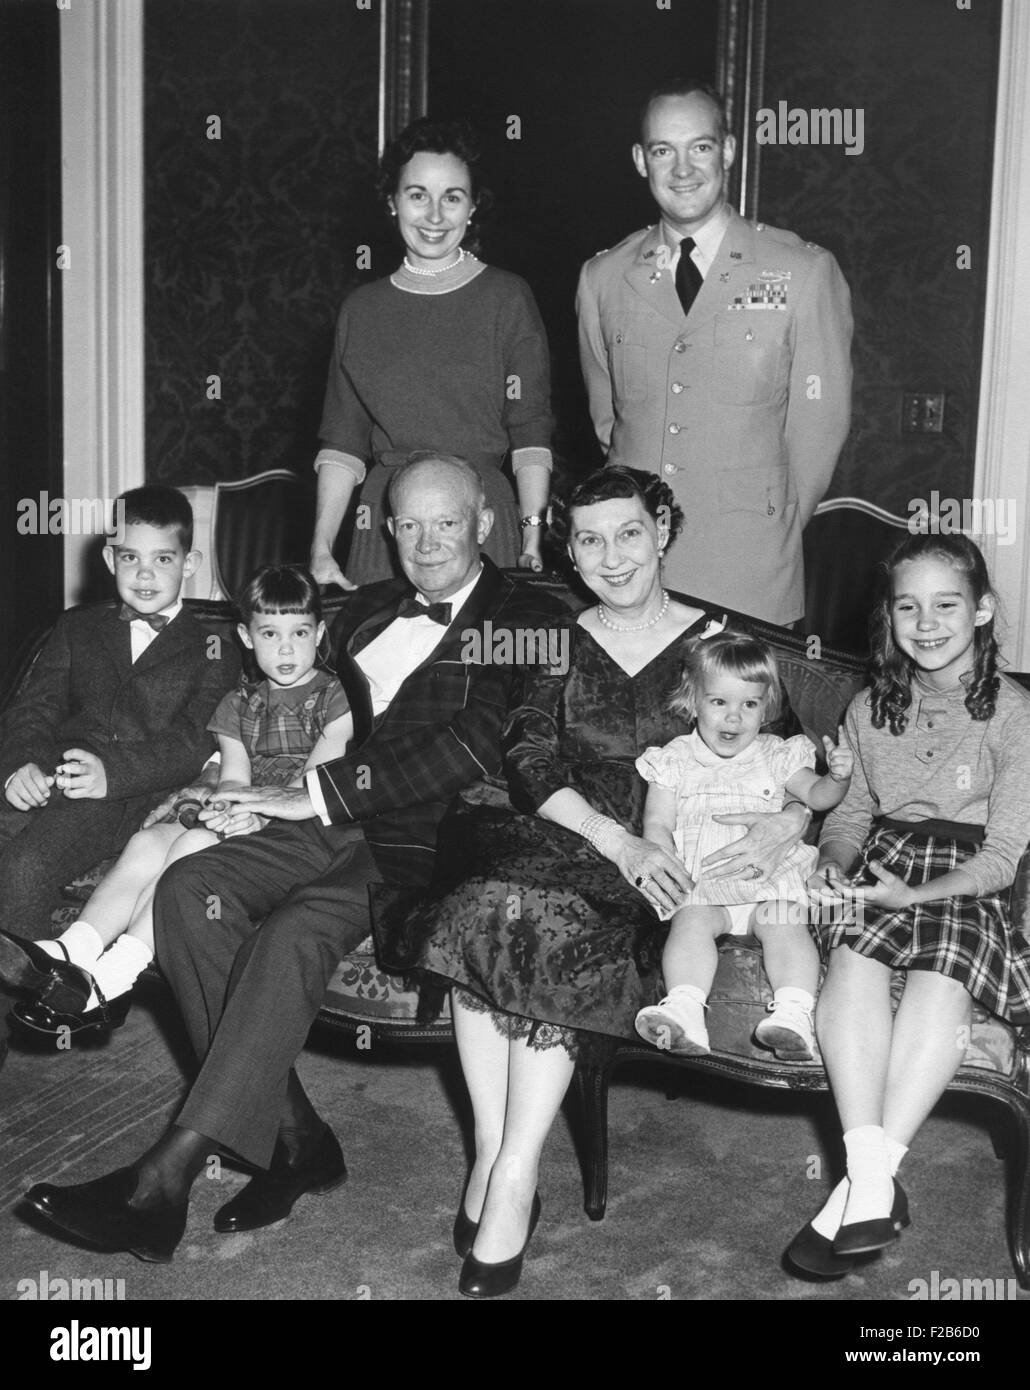 Christmas portrait of President Dwight and Mamie Eisenhower with their four grandchildren. Seated L-R: David, Susan, the President and First Lady, Many Jean, and Barbara Ann. Standing, L-R: Barbara and John Eisenhower. - (BSLOC 2014 16 104) Stock Photo